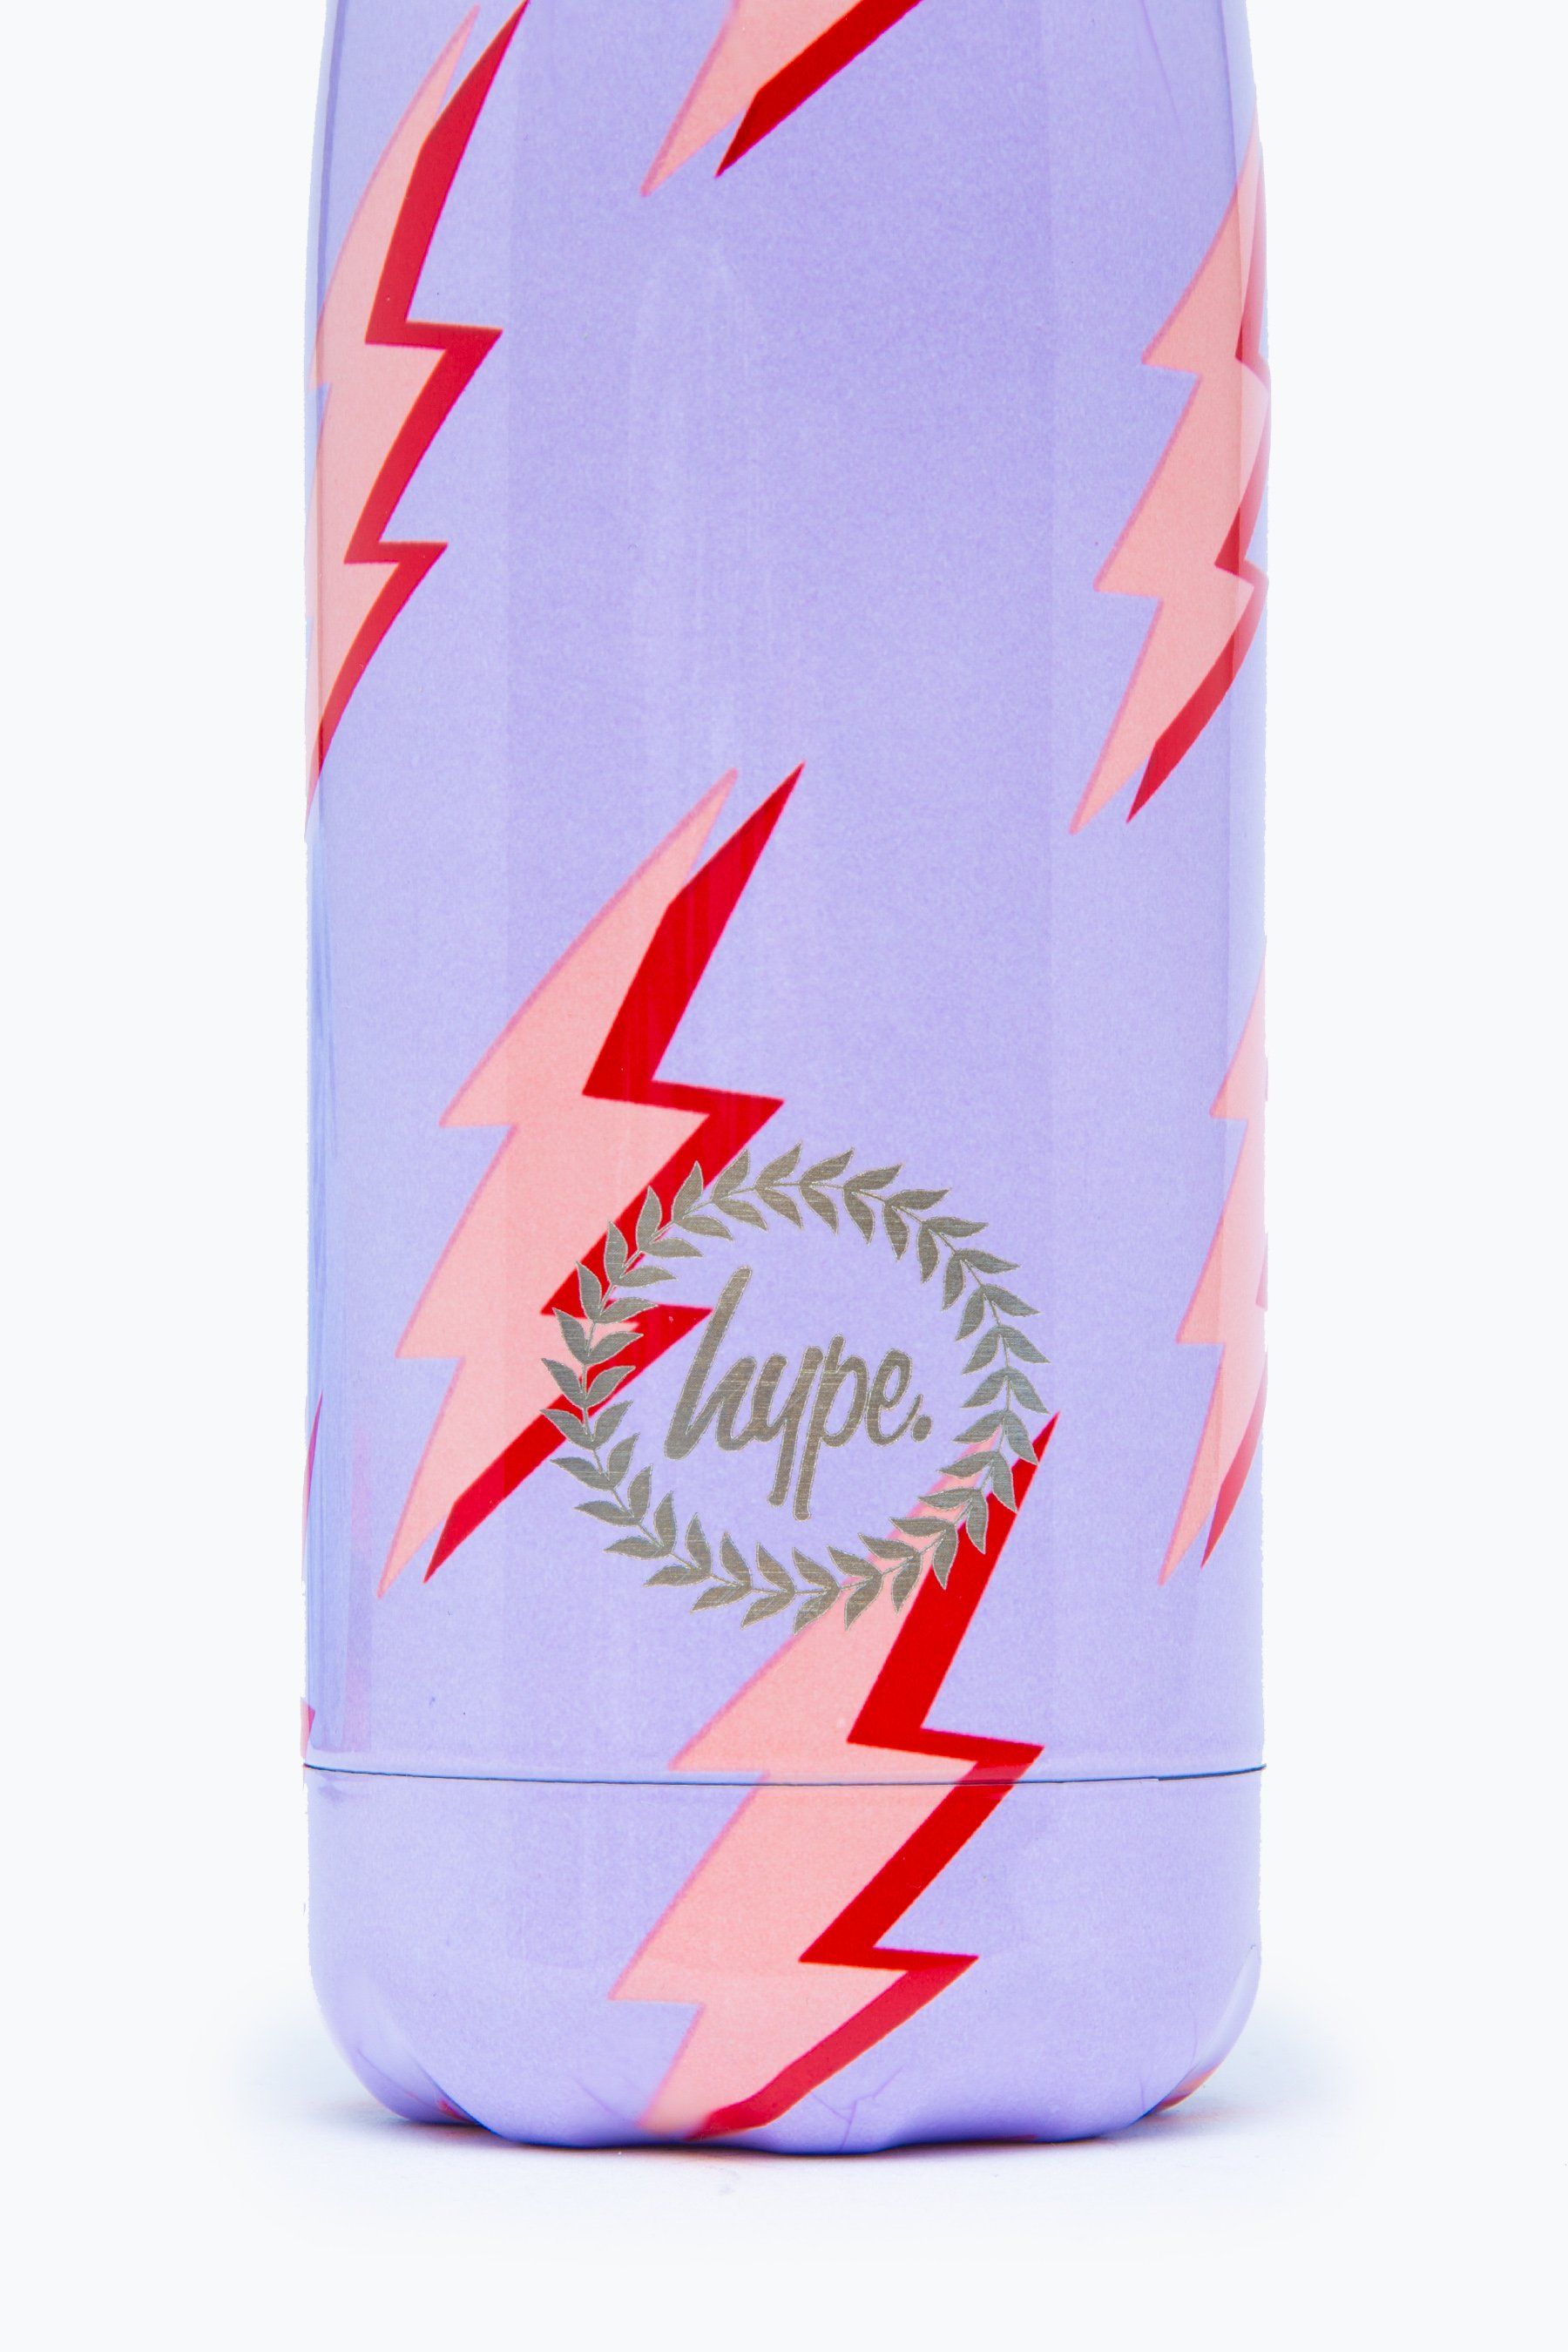 Keeping you hydrated, in style. Meet the HYPE. Lilac Lightning Metal Reusable Water Bottle, perfect for when you're on the go. The design features a paint-splat inspired effect in a pastel beige, blue and yellow. Designed in Aluminium to ensure your water stays ice-cold and for chillier days, keeping your oat milk latte warm for longer. Reuse it again and again with an airtight screw lid prevents spills. With an all-over lightning print in a pastel pink, peach and red colour palette. Why not grab one of our lunch bags or backpacks with a bottle holder to complete the look. Hand wash only.